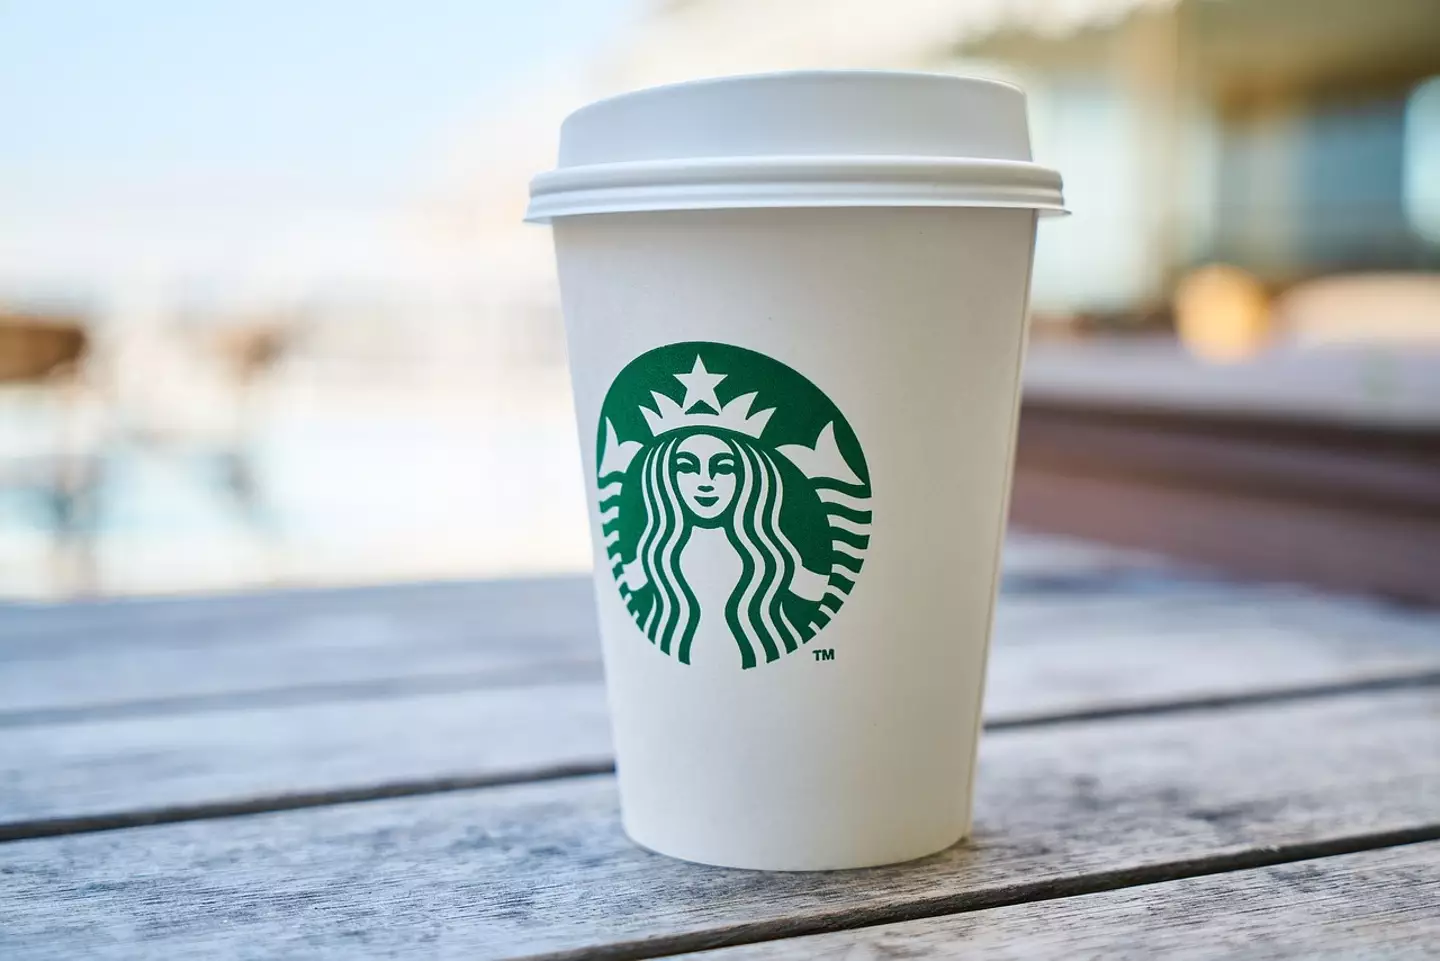 Starbucks is a controversial brand in Turkey.